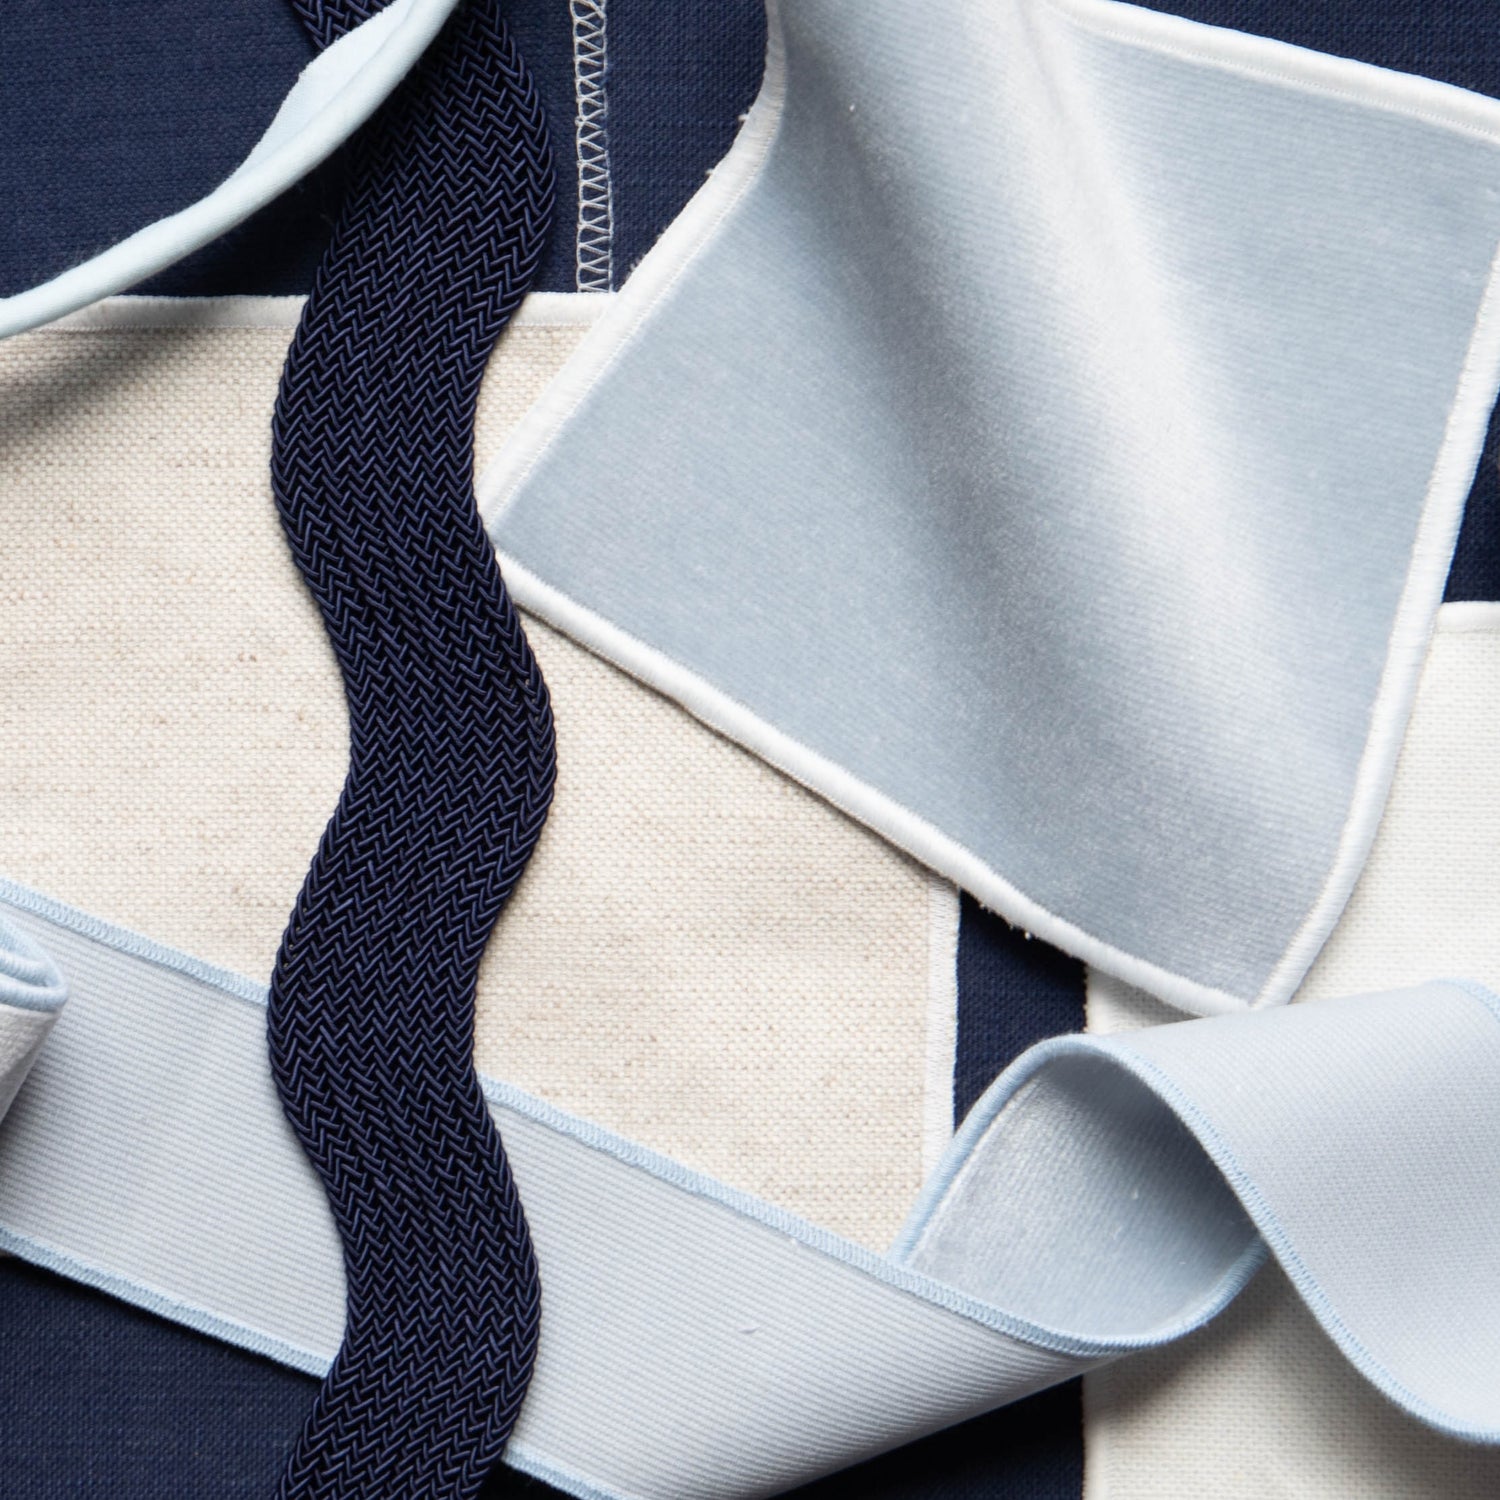 Interior design moodboard and fabric inspirations with Sky Blue Velvet Swatch, Light Brown Linen Swatch, Navy Blue Cotton Swatch, and Navy Blue Rick Rack Trim